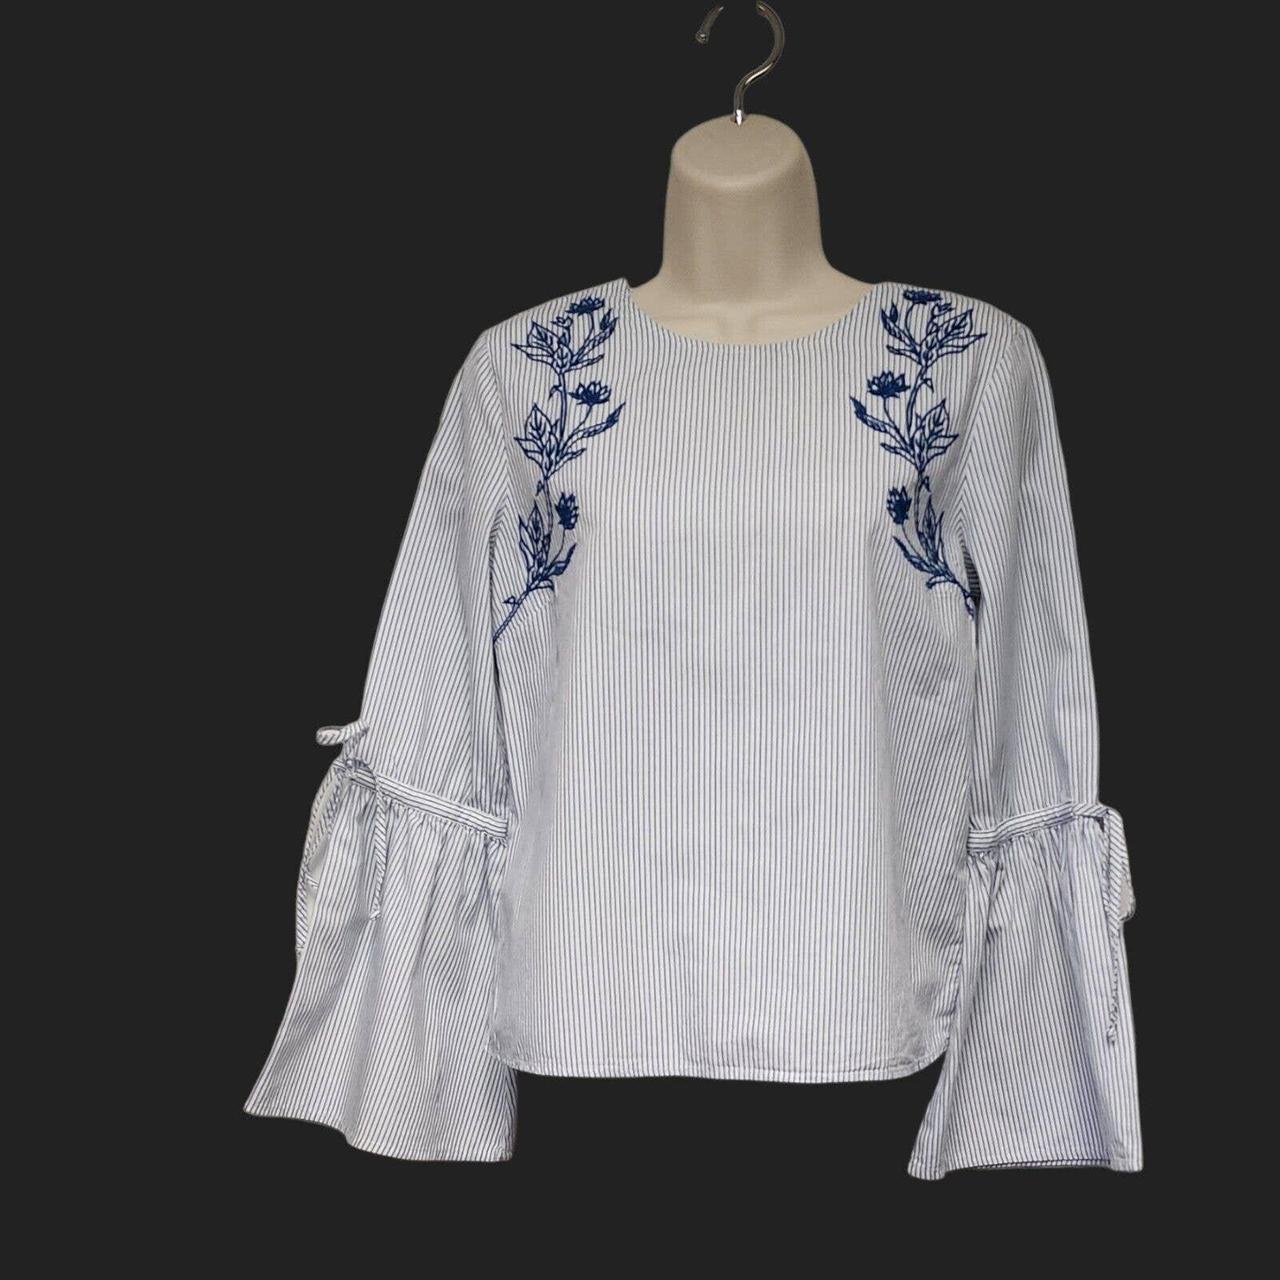 Dizzy Lizzy Women's Blue and White Blouse